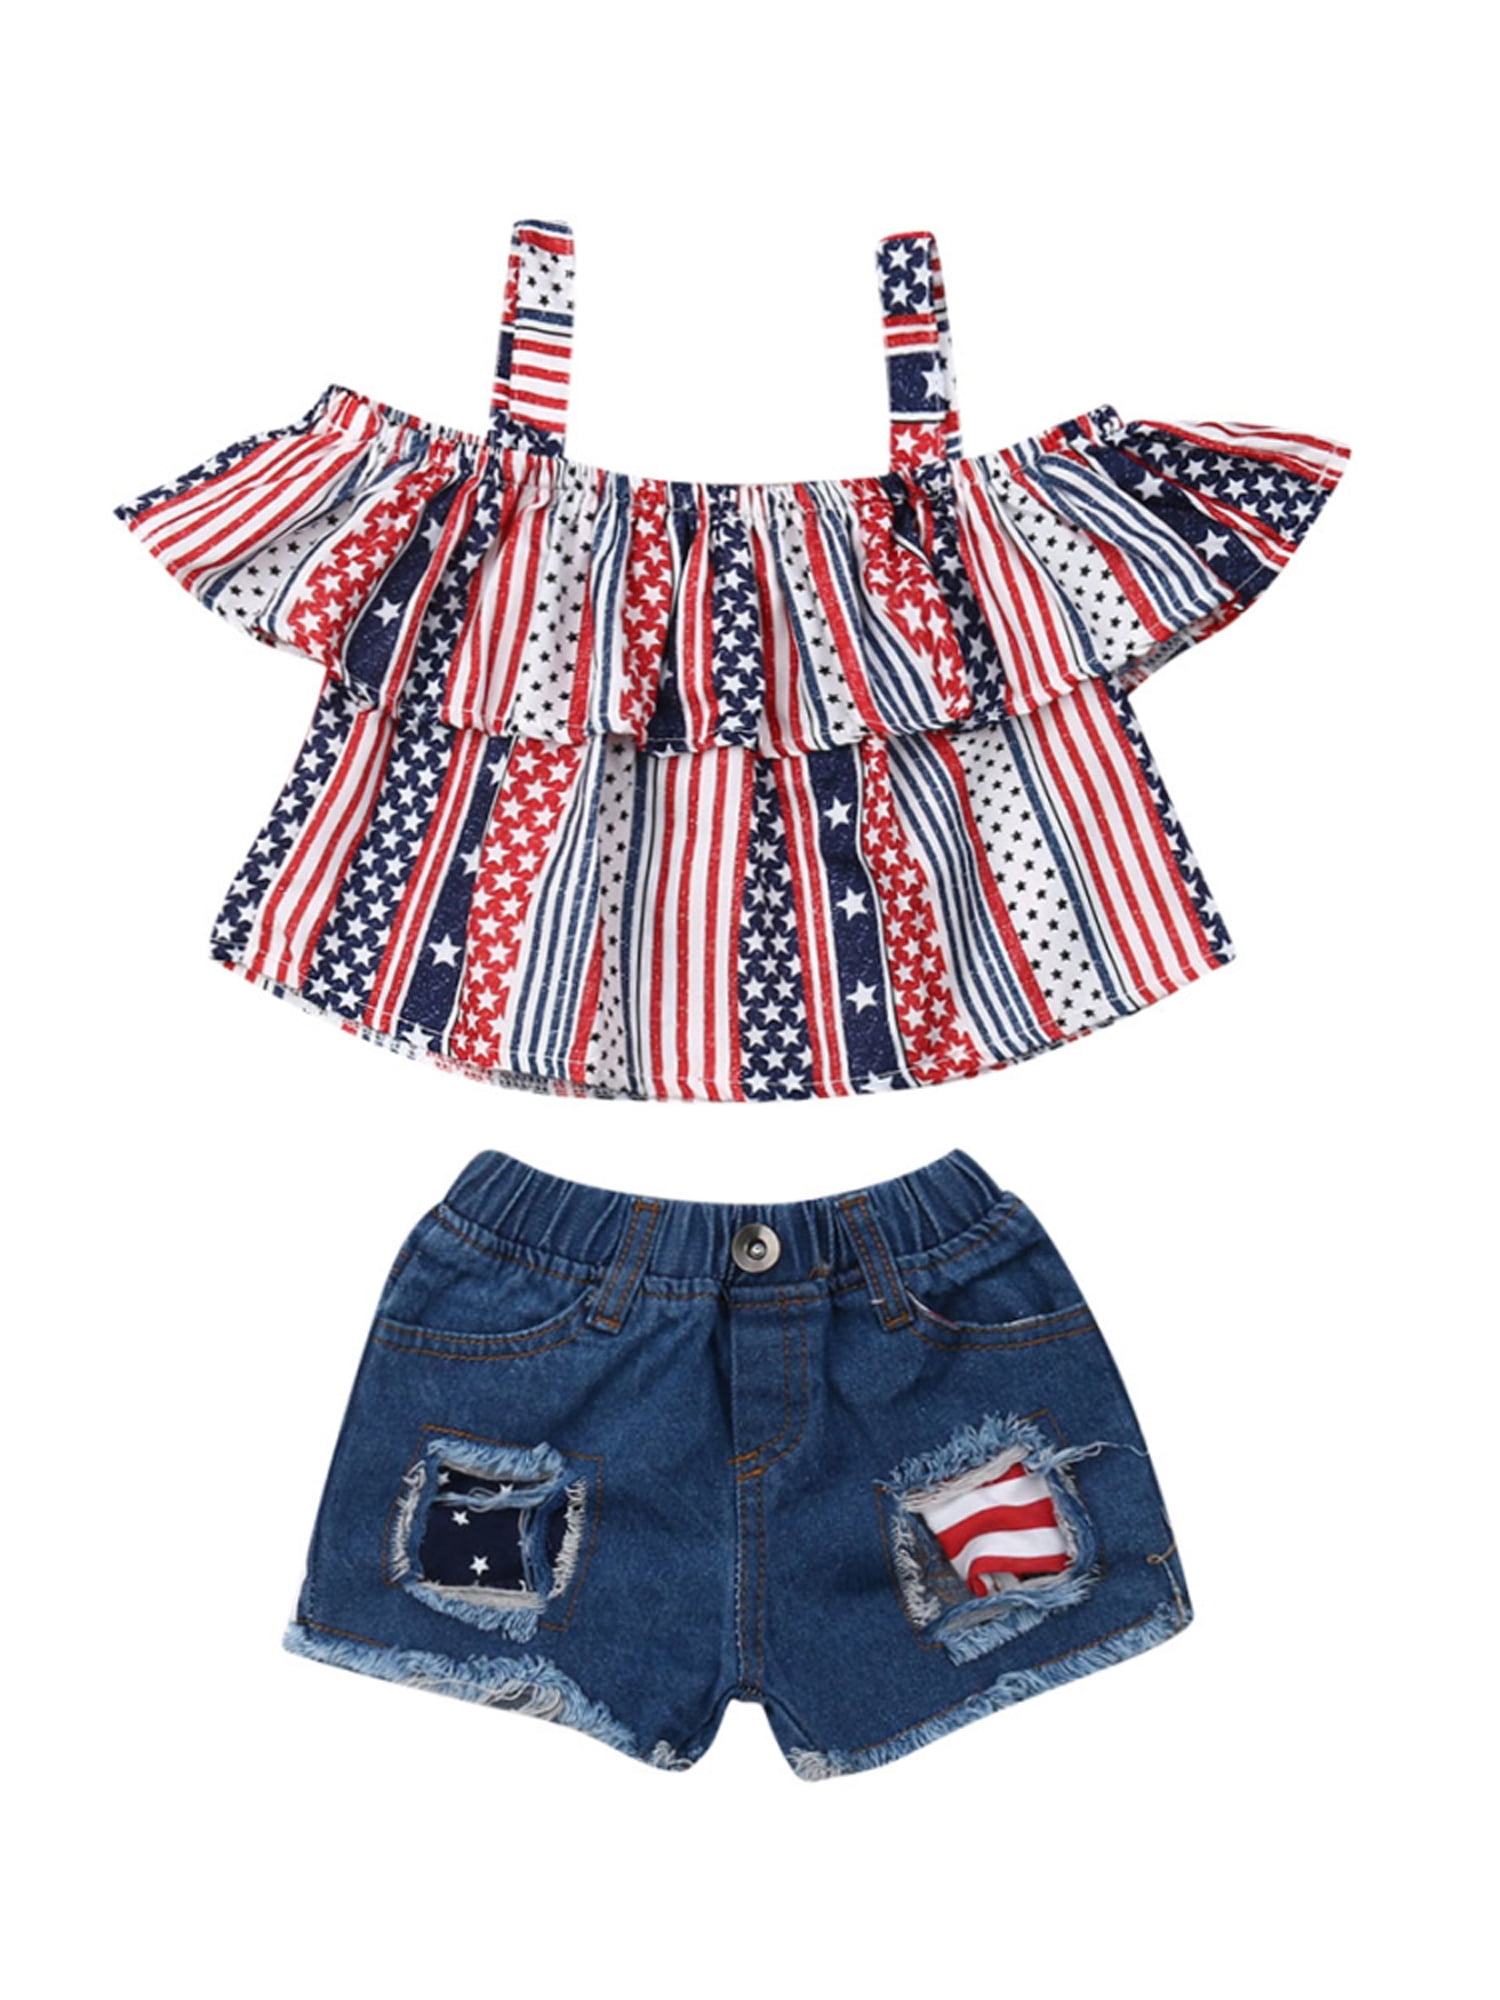 2-7Years,SO-buts Kids Baby Boys Summer Outfit Clothes Shirt Tops Blouse+Shorts Pants Gentleman Party Suit